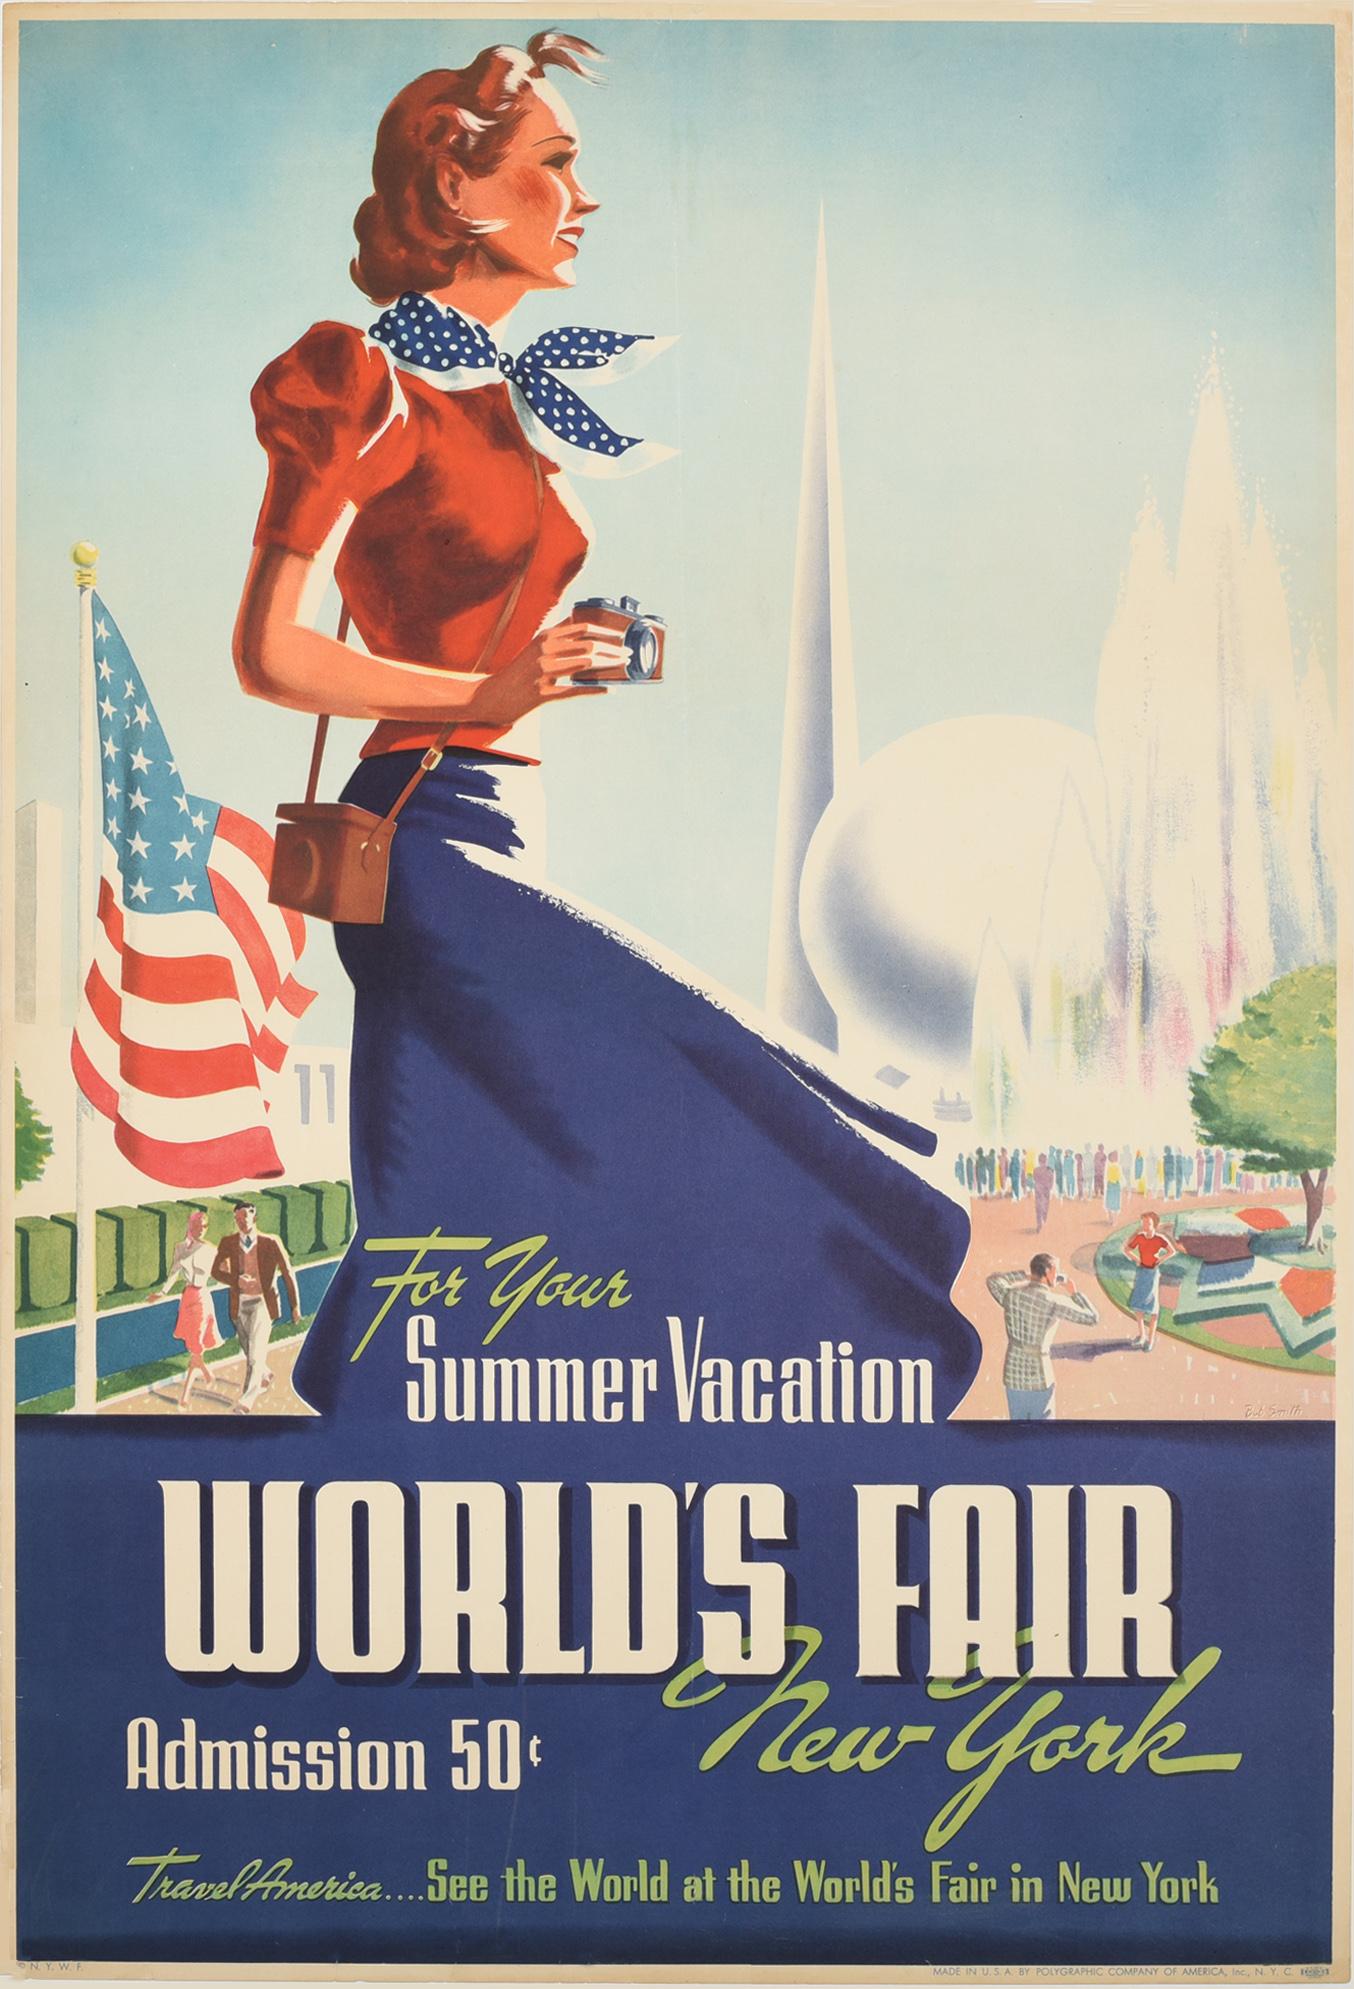 Unknown Print - Original Vintage Travel Poster See The World's Fair New York Summer Vacation